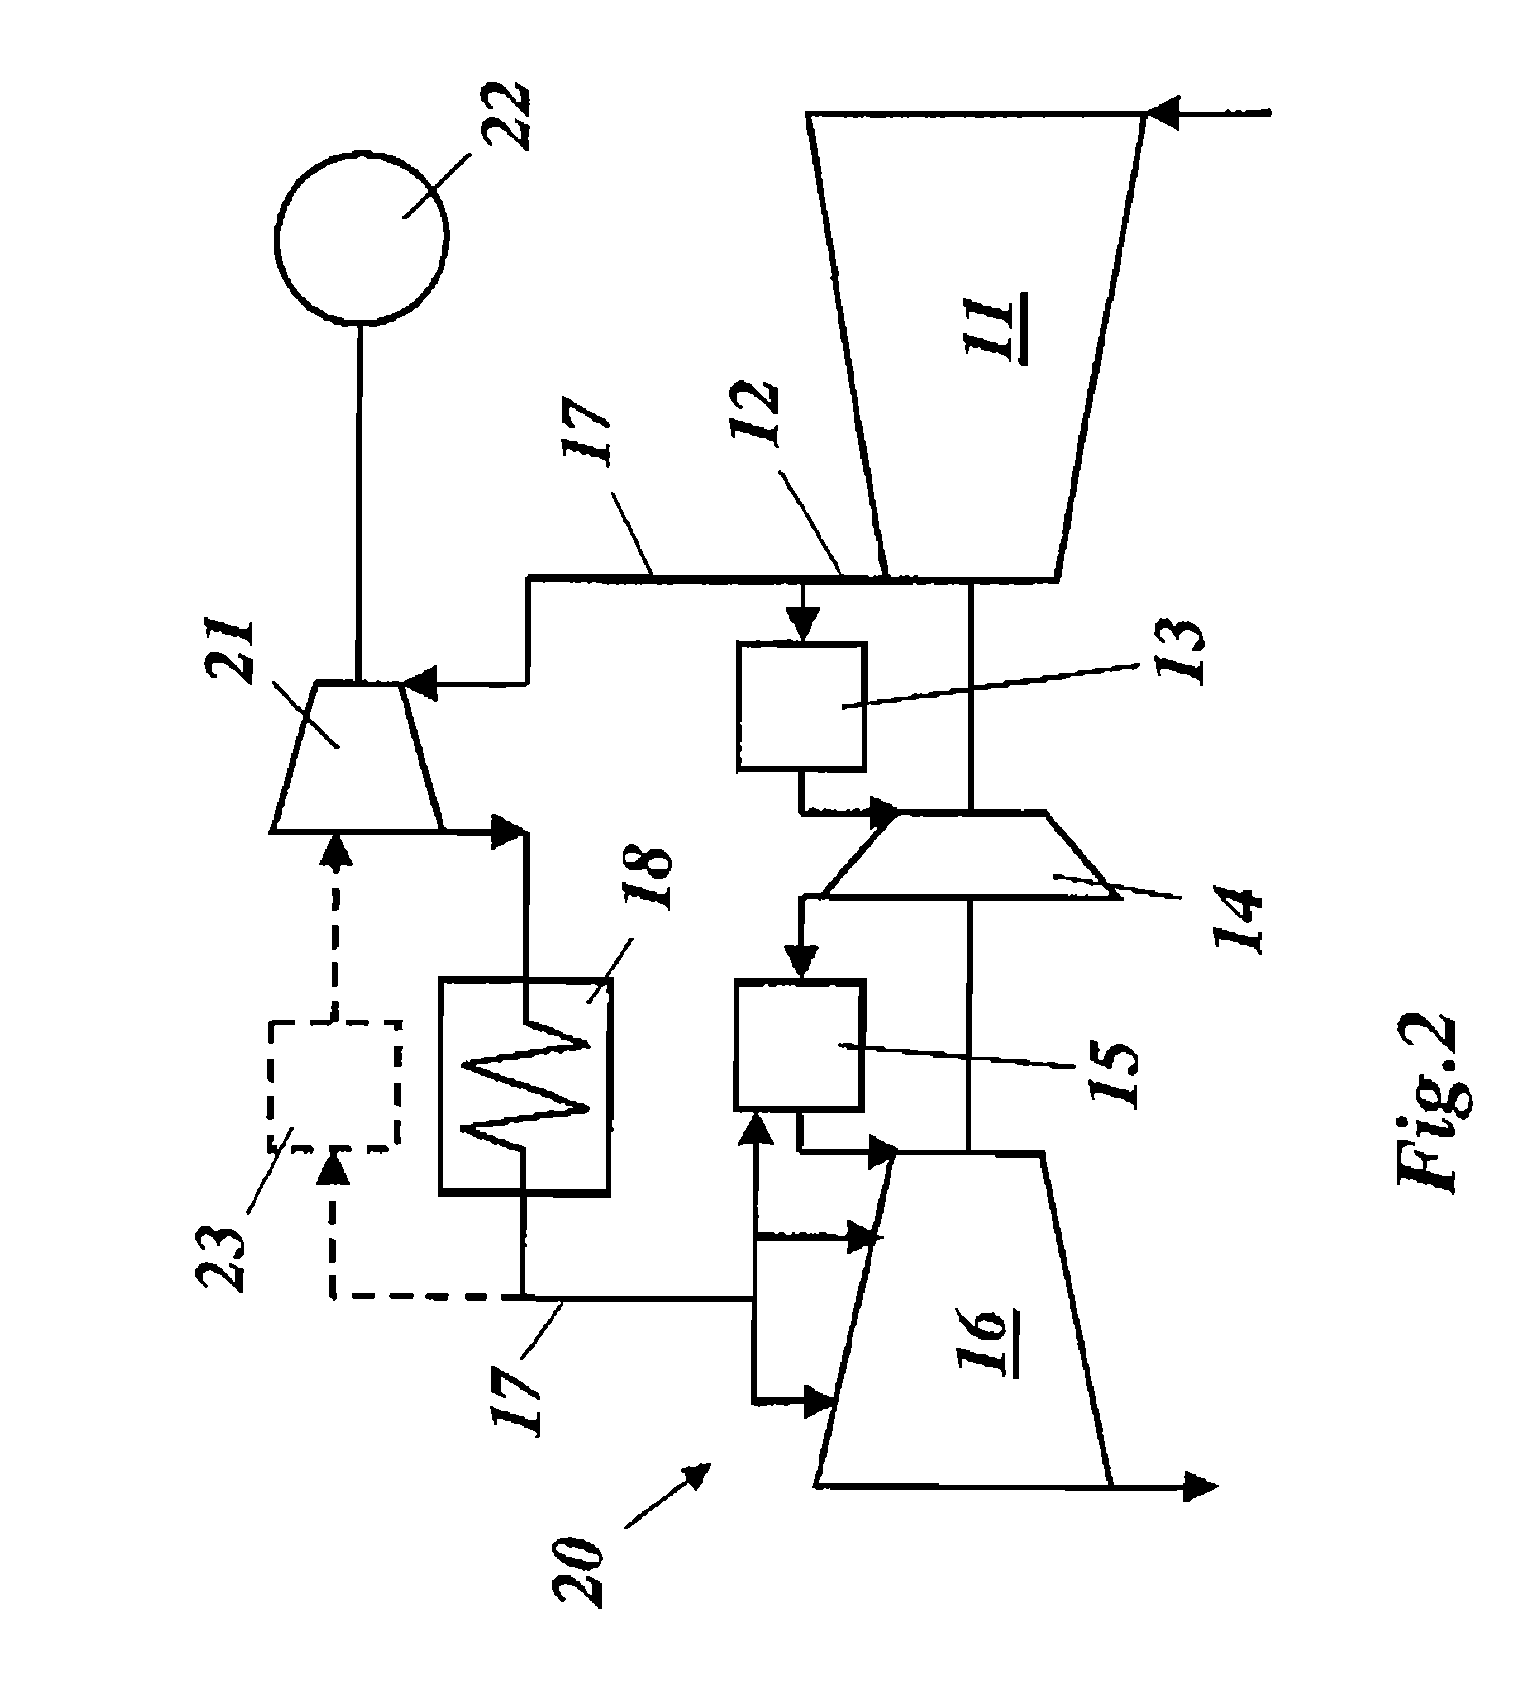 Gas turbine with heat exchanger for cooling compressed air and preheating a fuel